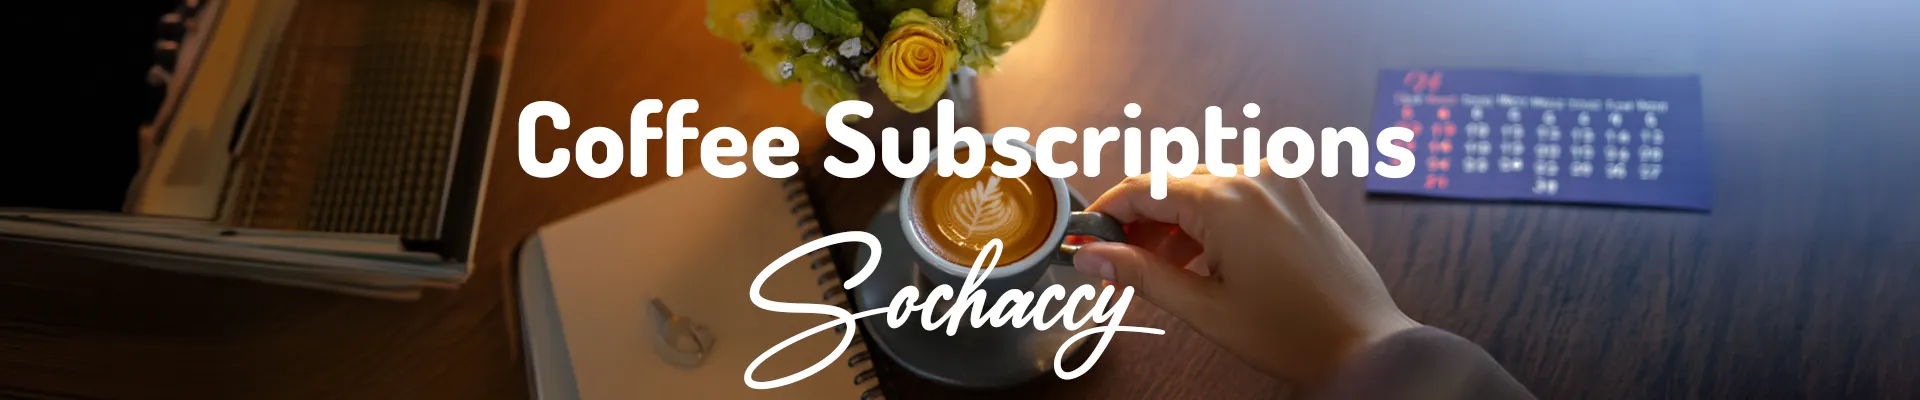 coffee subscriptions